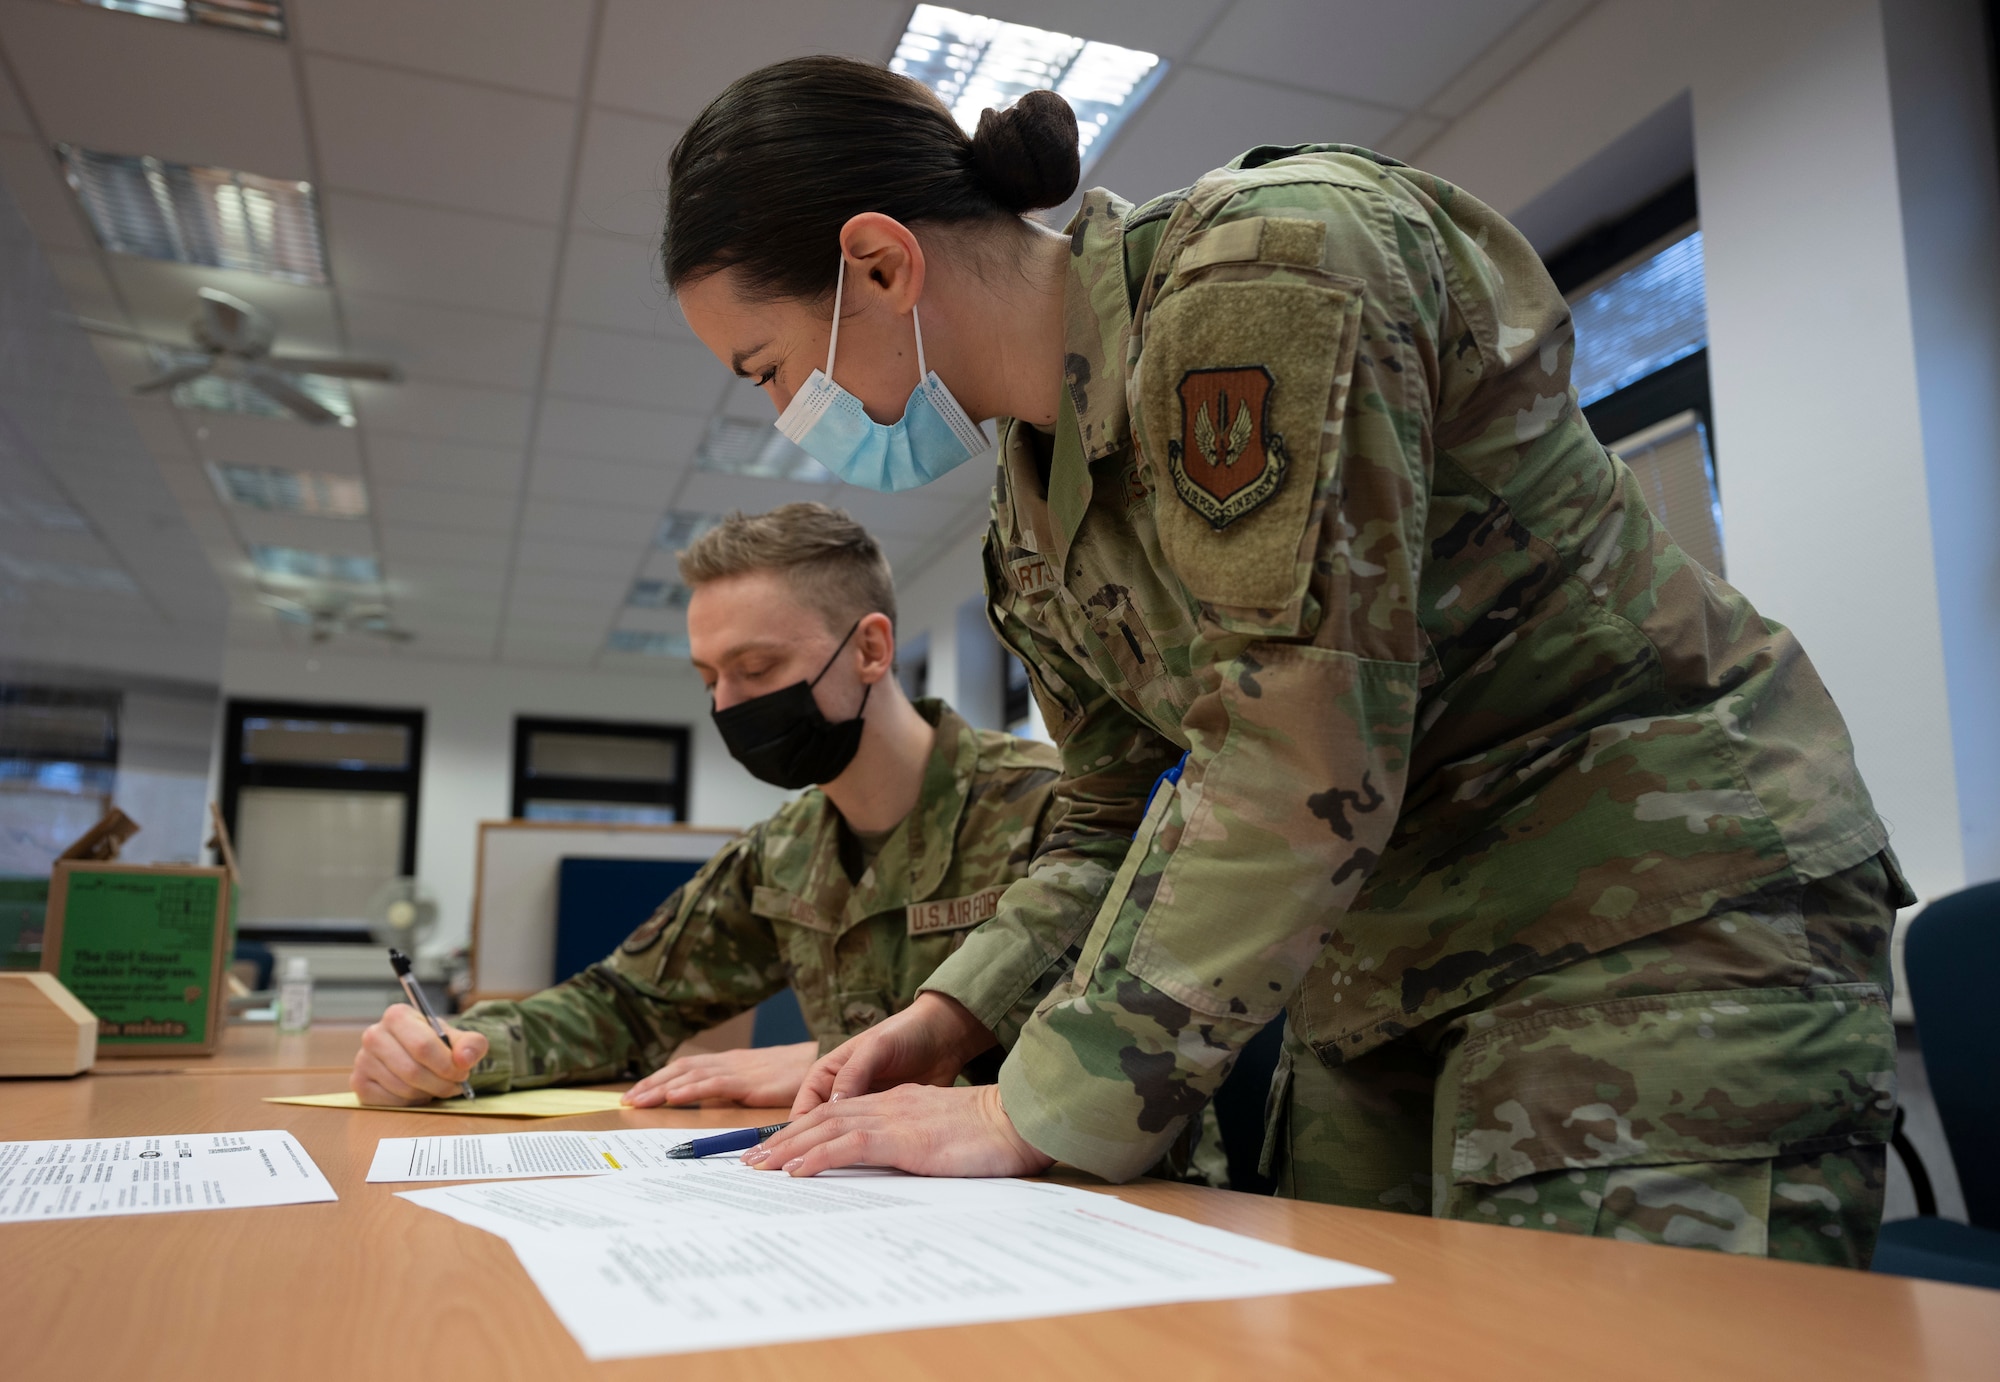 U.S. Air Force 1st Lt. Ashley Hartshorn, officer in charge of the Ramstein Tax Center, assists a client prepare their taxes at Ramstein Air Base, Germany, Feb. 16, 2022. Hartshorn and six other volunteers are standing by to help members of the Kaiserslautern Military Community with their taxes and 2022 returns. (U.S. Air Force photo by Senior Airman Thomas Karol)